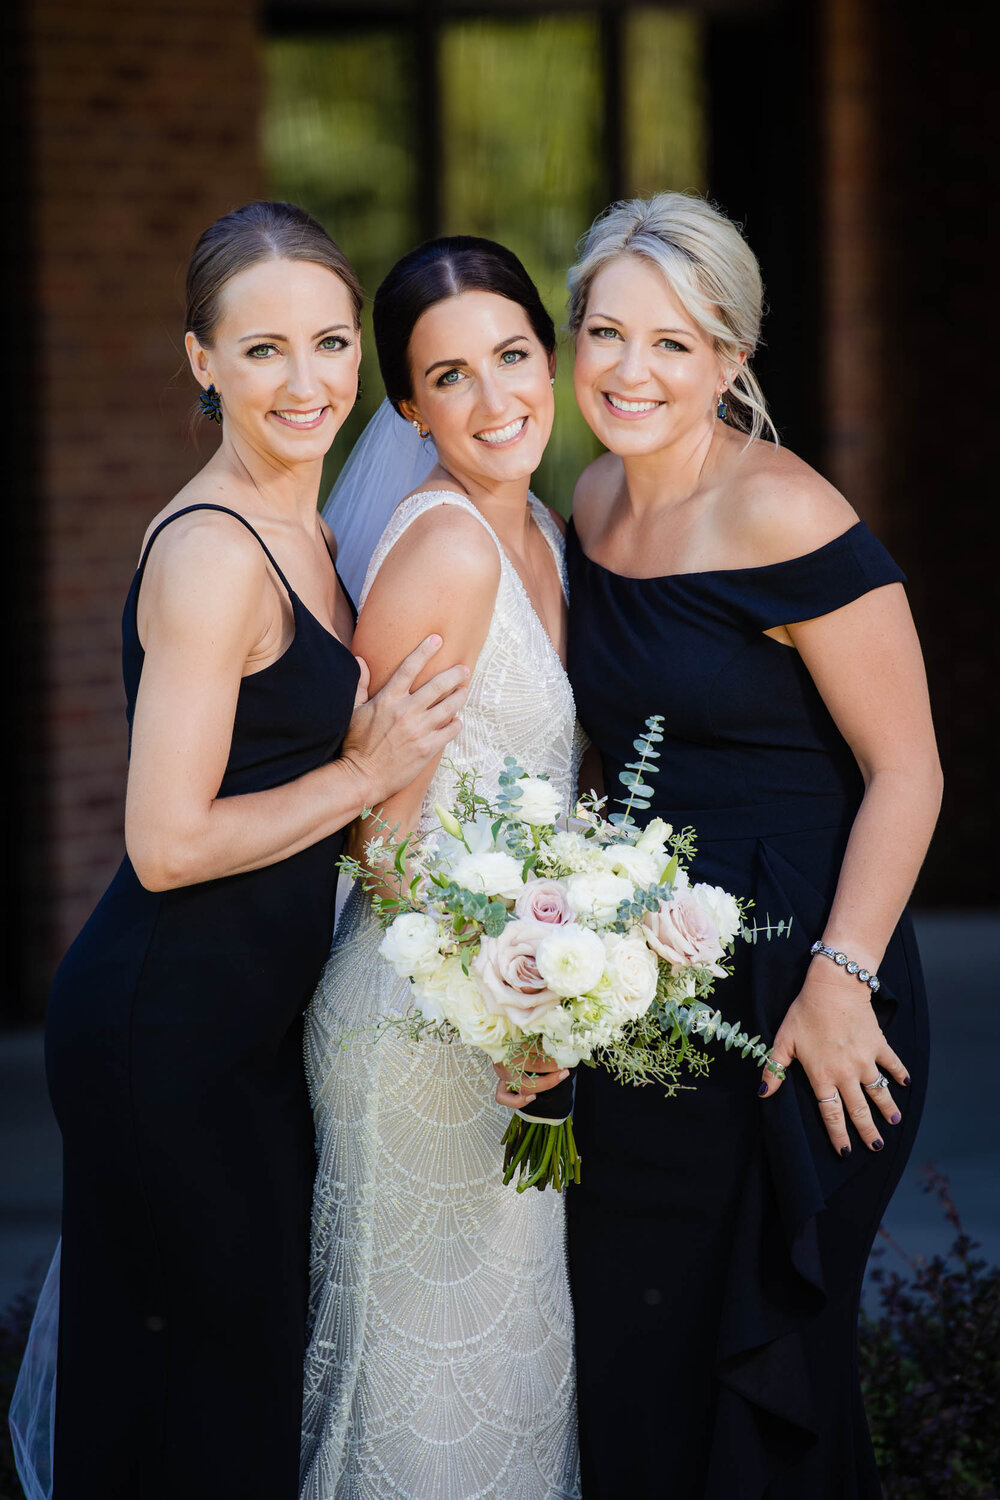 Bride with her bridesmaids on her wedding day:  Chicago wedding photography by J. Brown Photography.